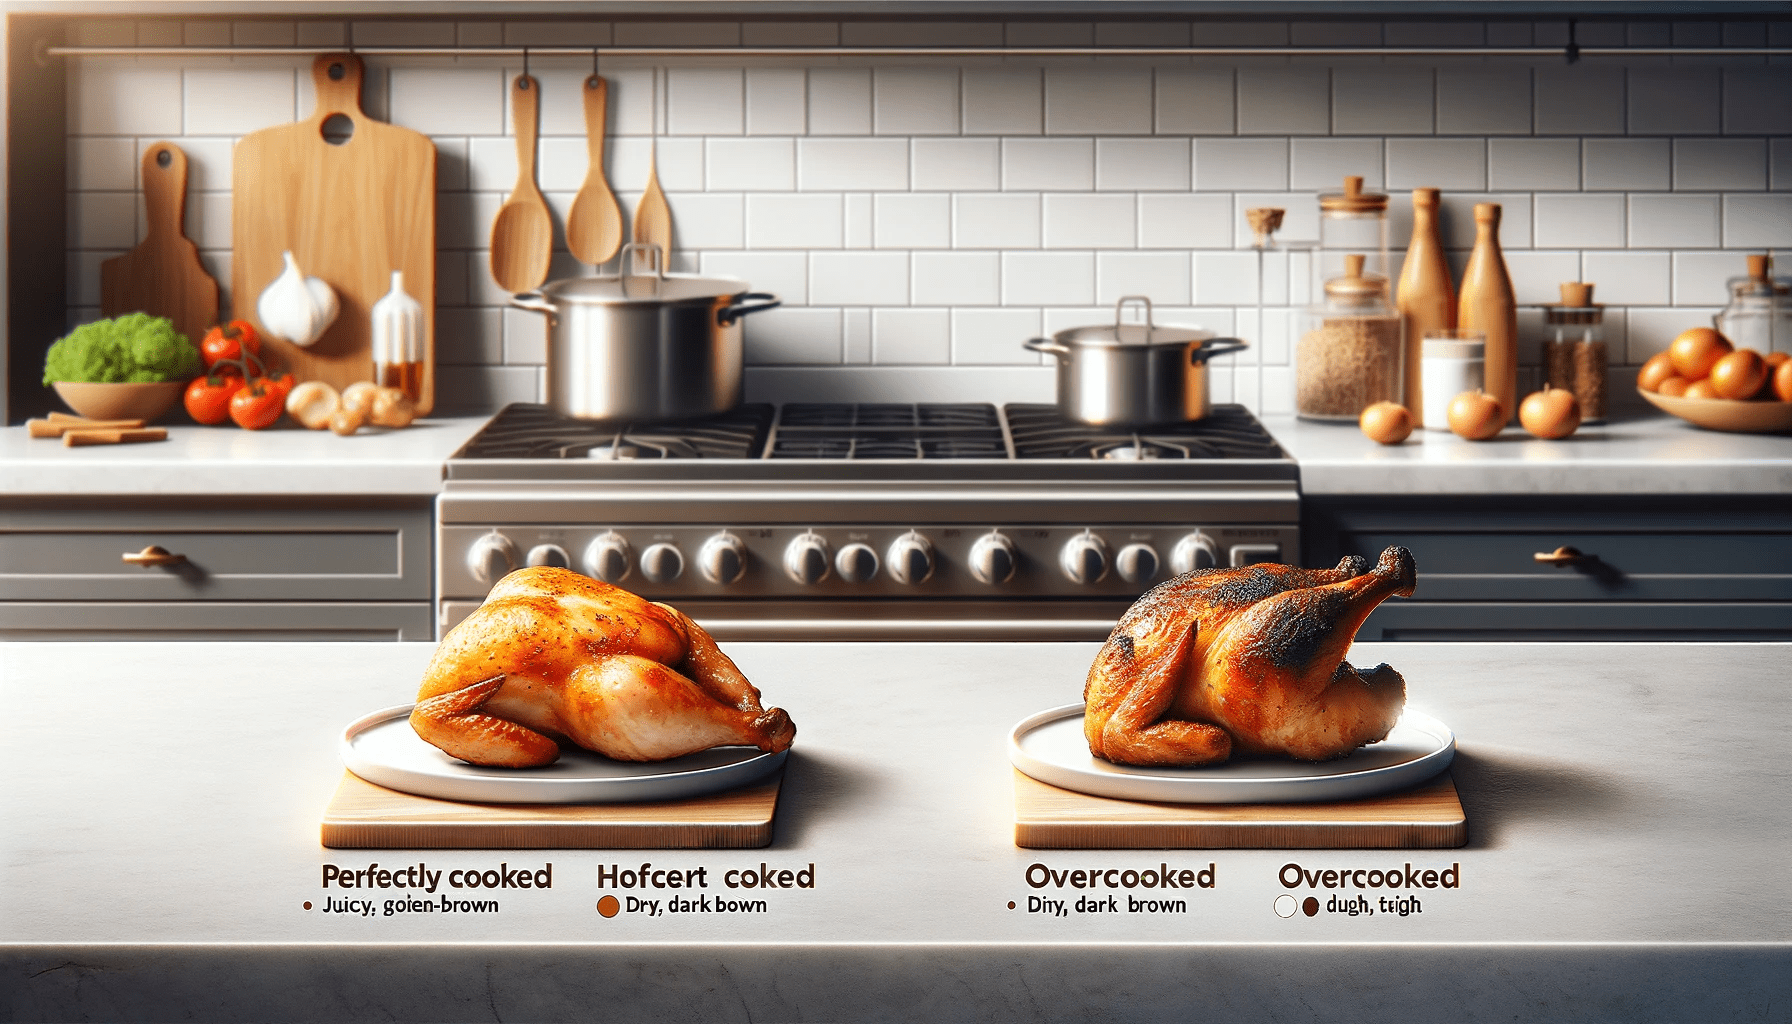 How to Tell If Chicken Is Overcooked